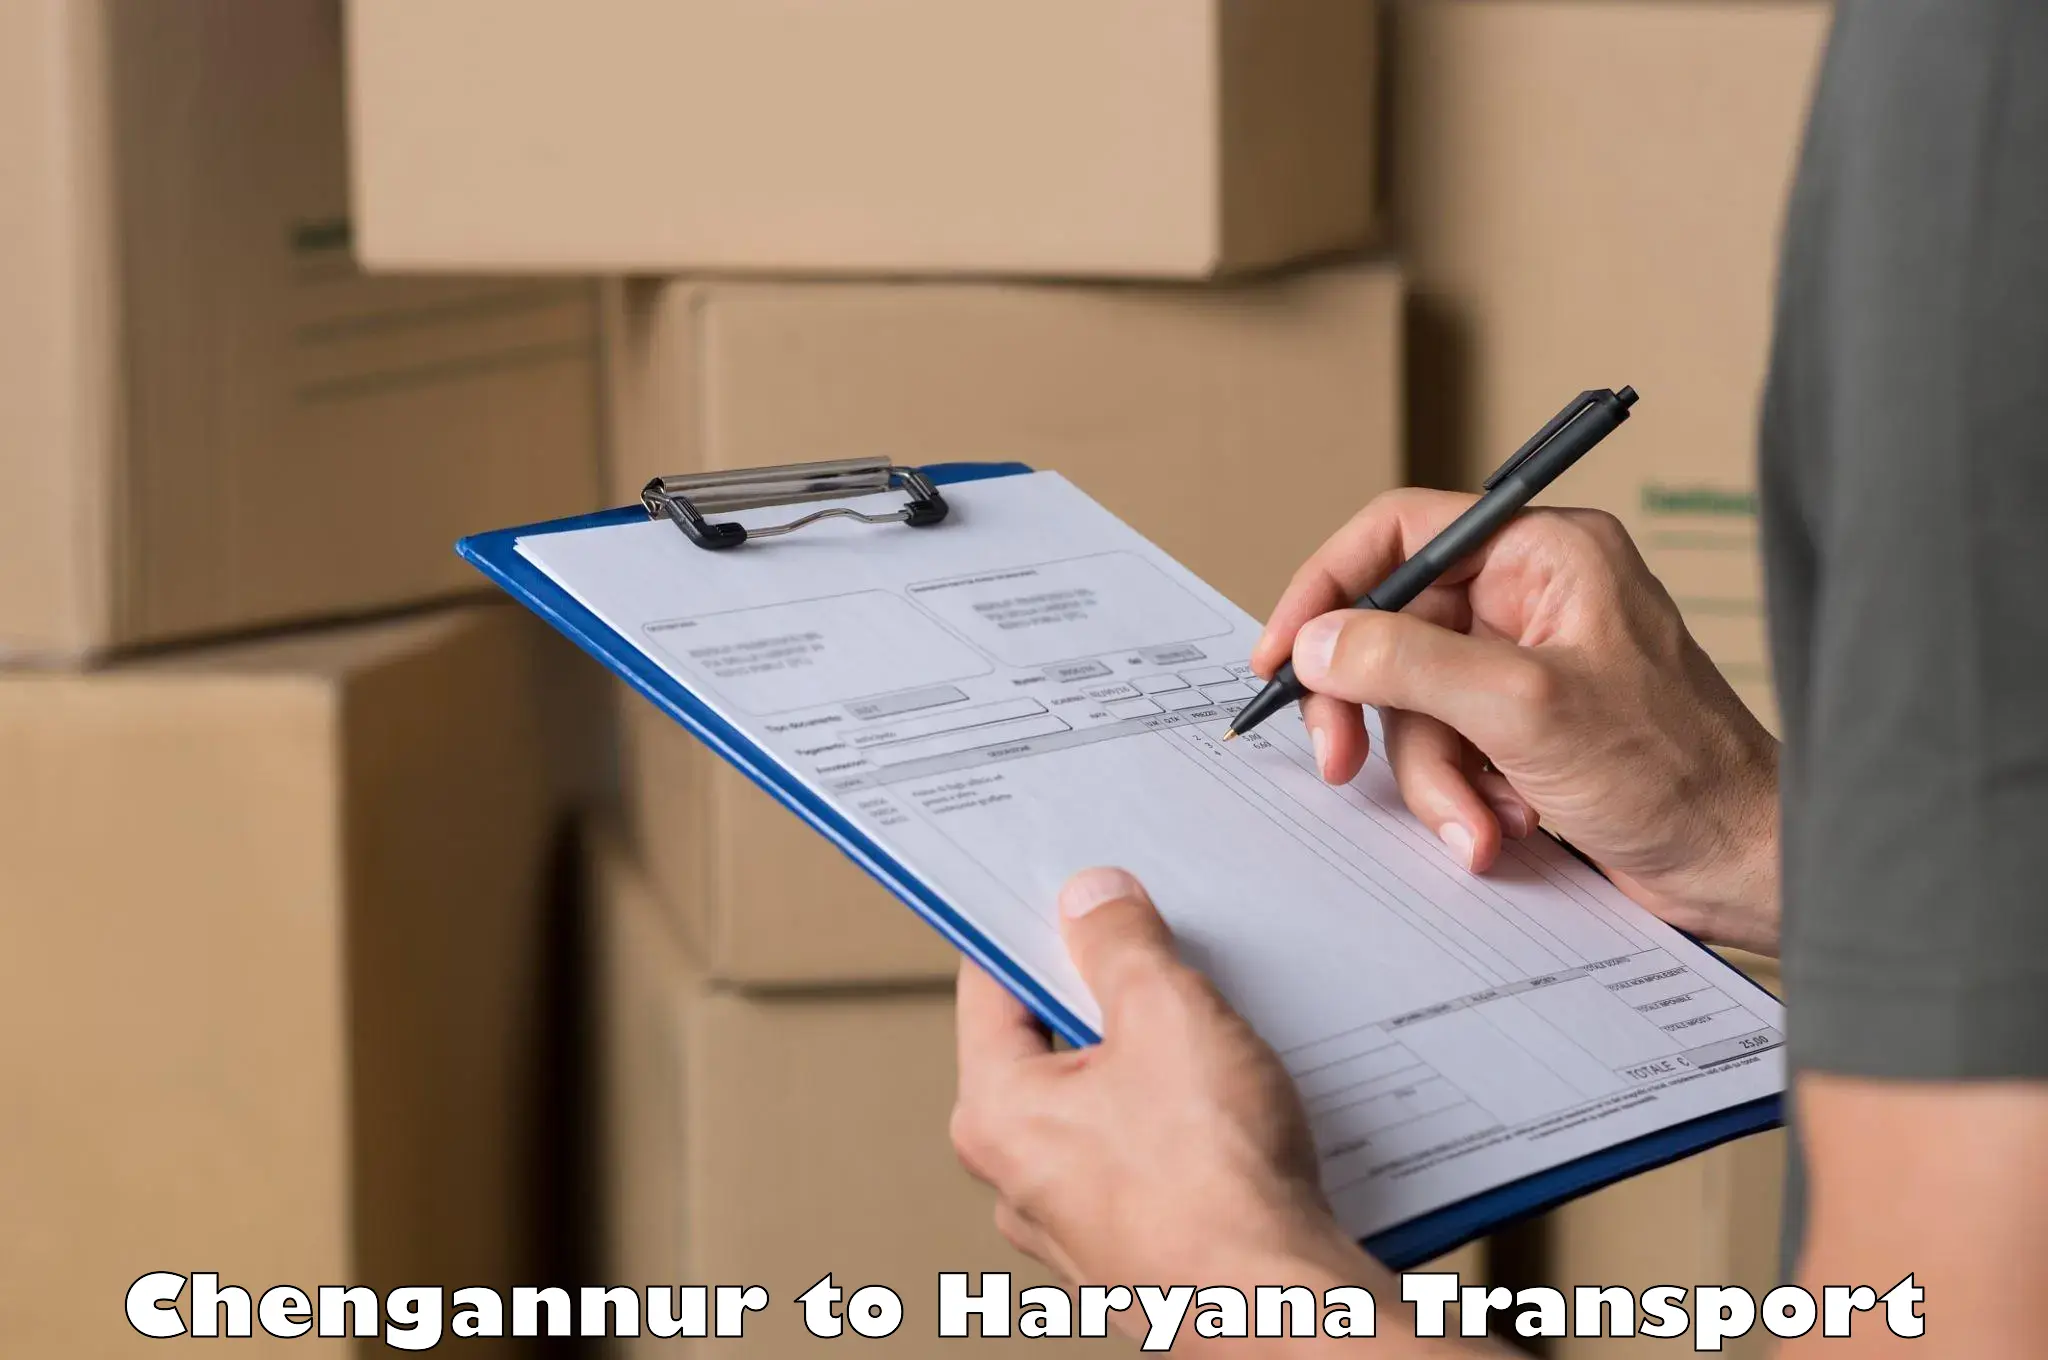 Two wheeler parcel service Chengannur to Gurgaon